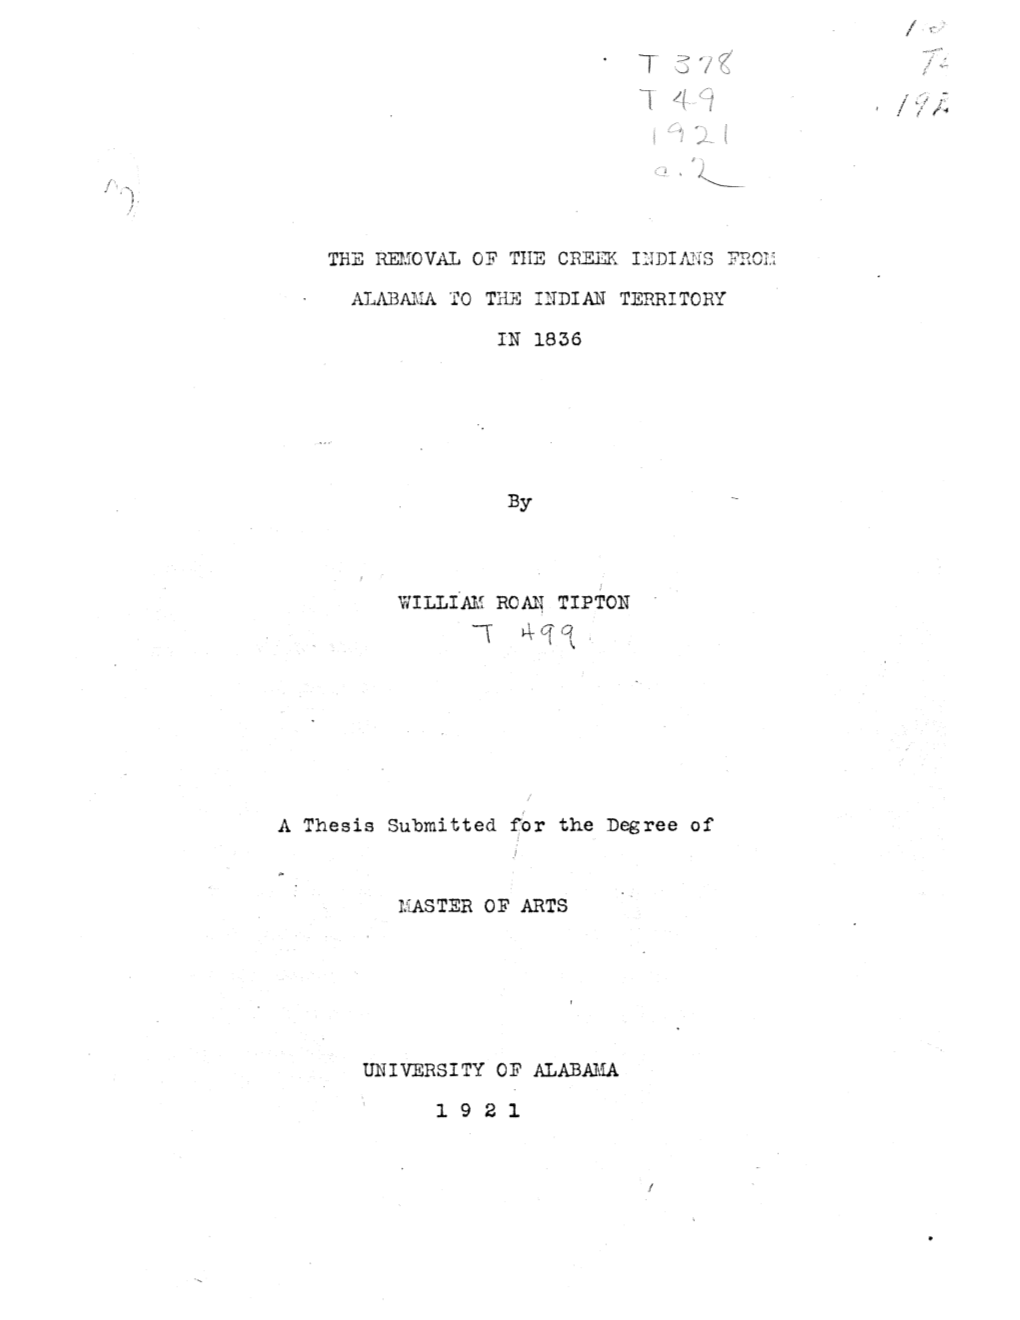 By a Thesis Submitted for the Degree Of